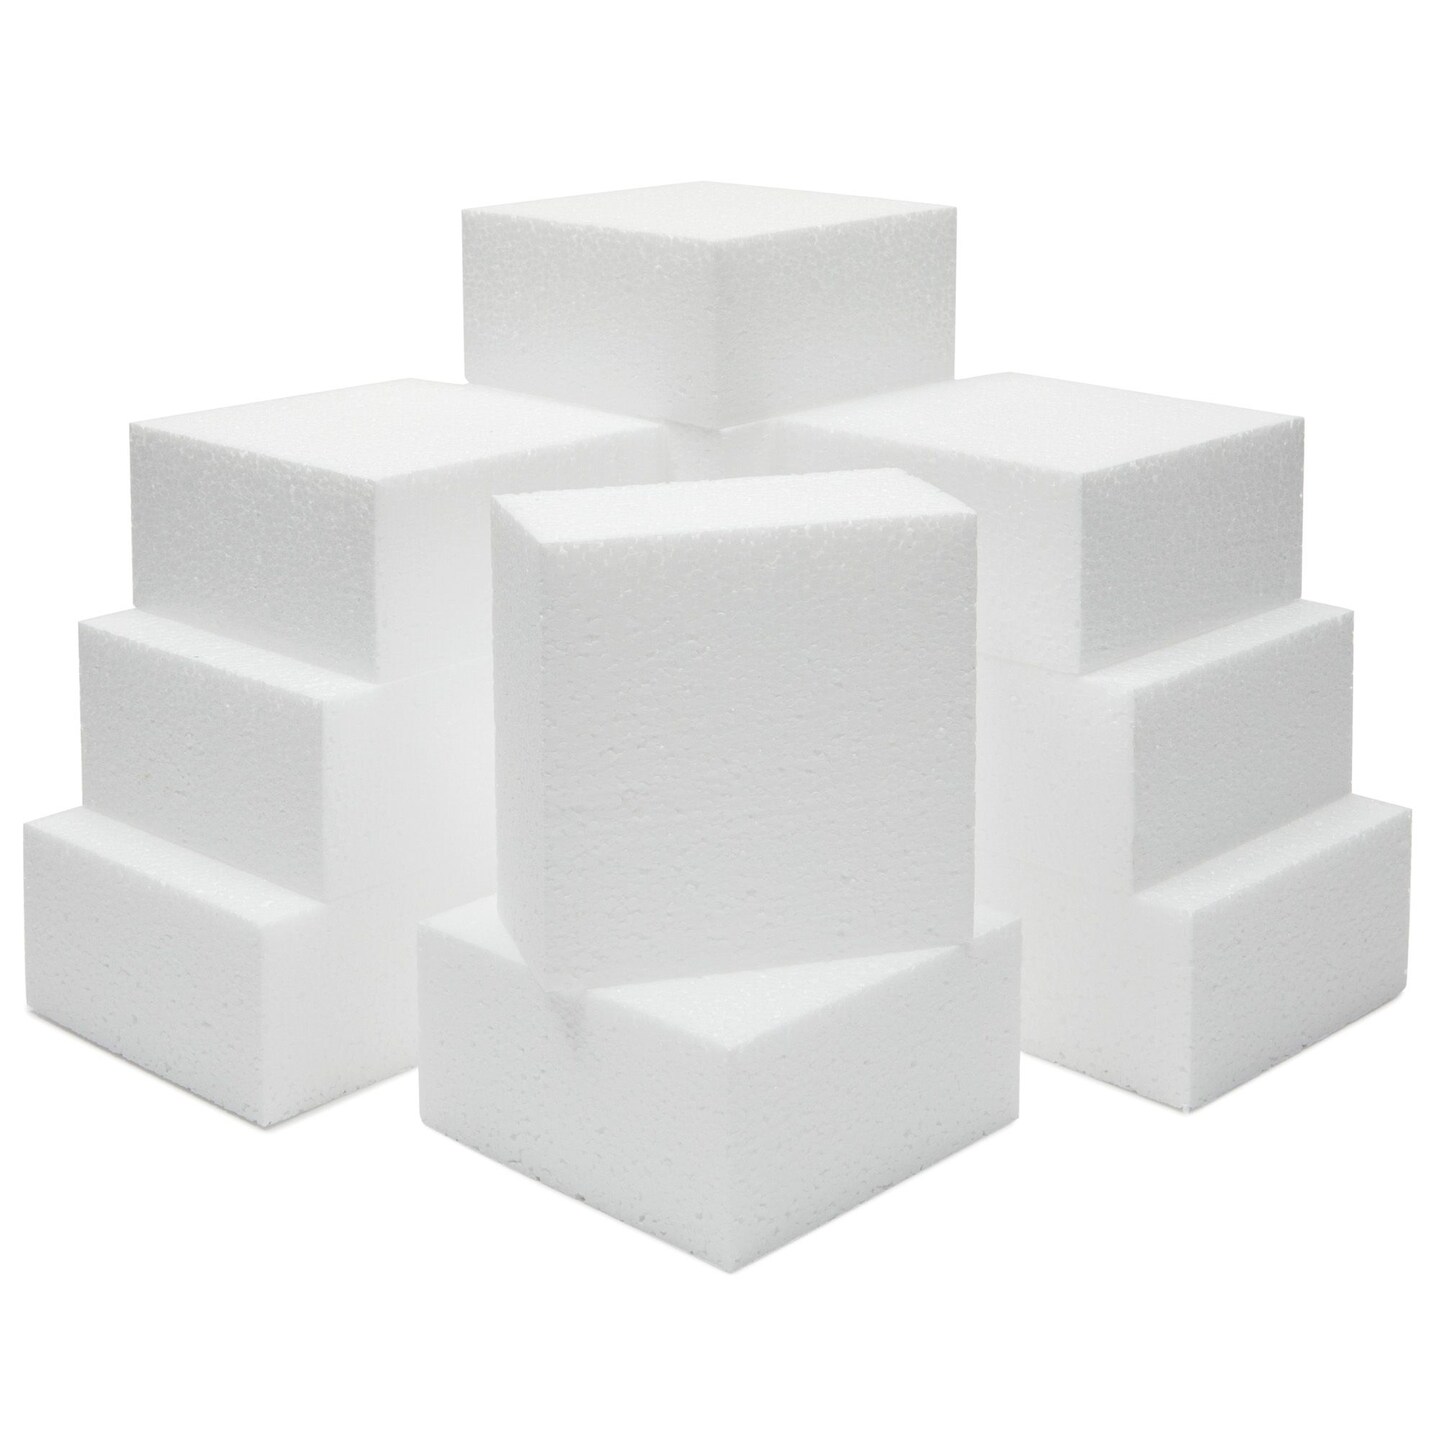 Silverlake Craft Foam Block - 12 Pack of 4x4x4 Foam Cubes, EPS Polystyrene  Squares for Crafting, Modeling, Art Projects and Floral Arrangements 